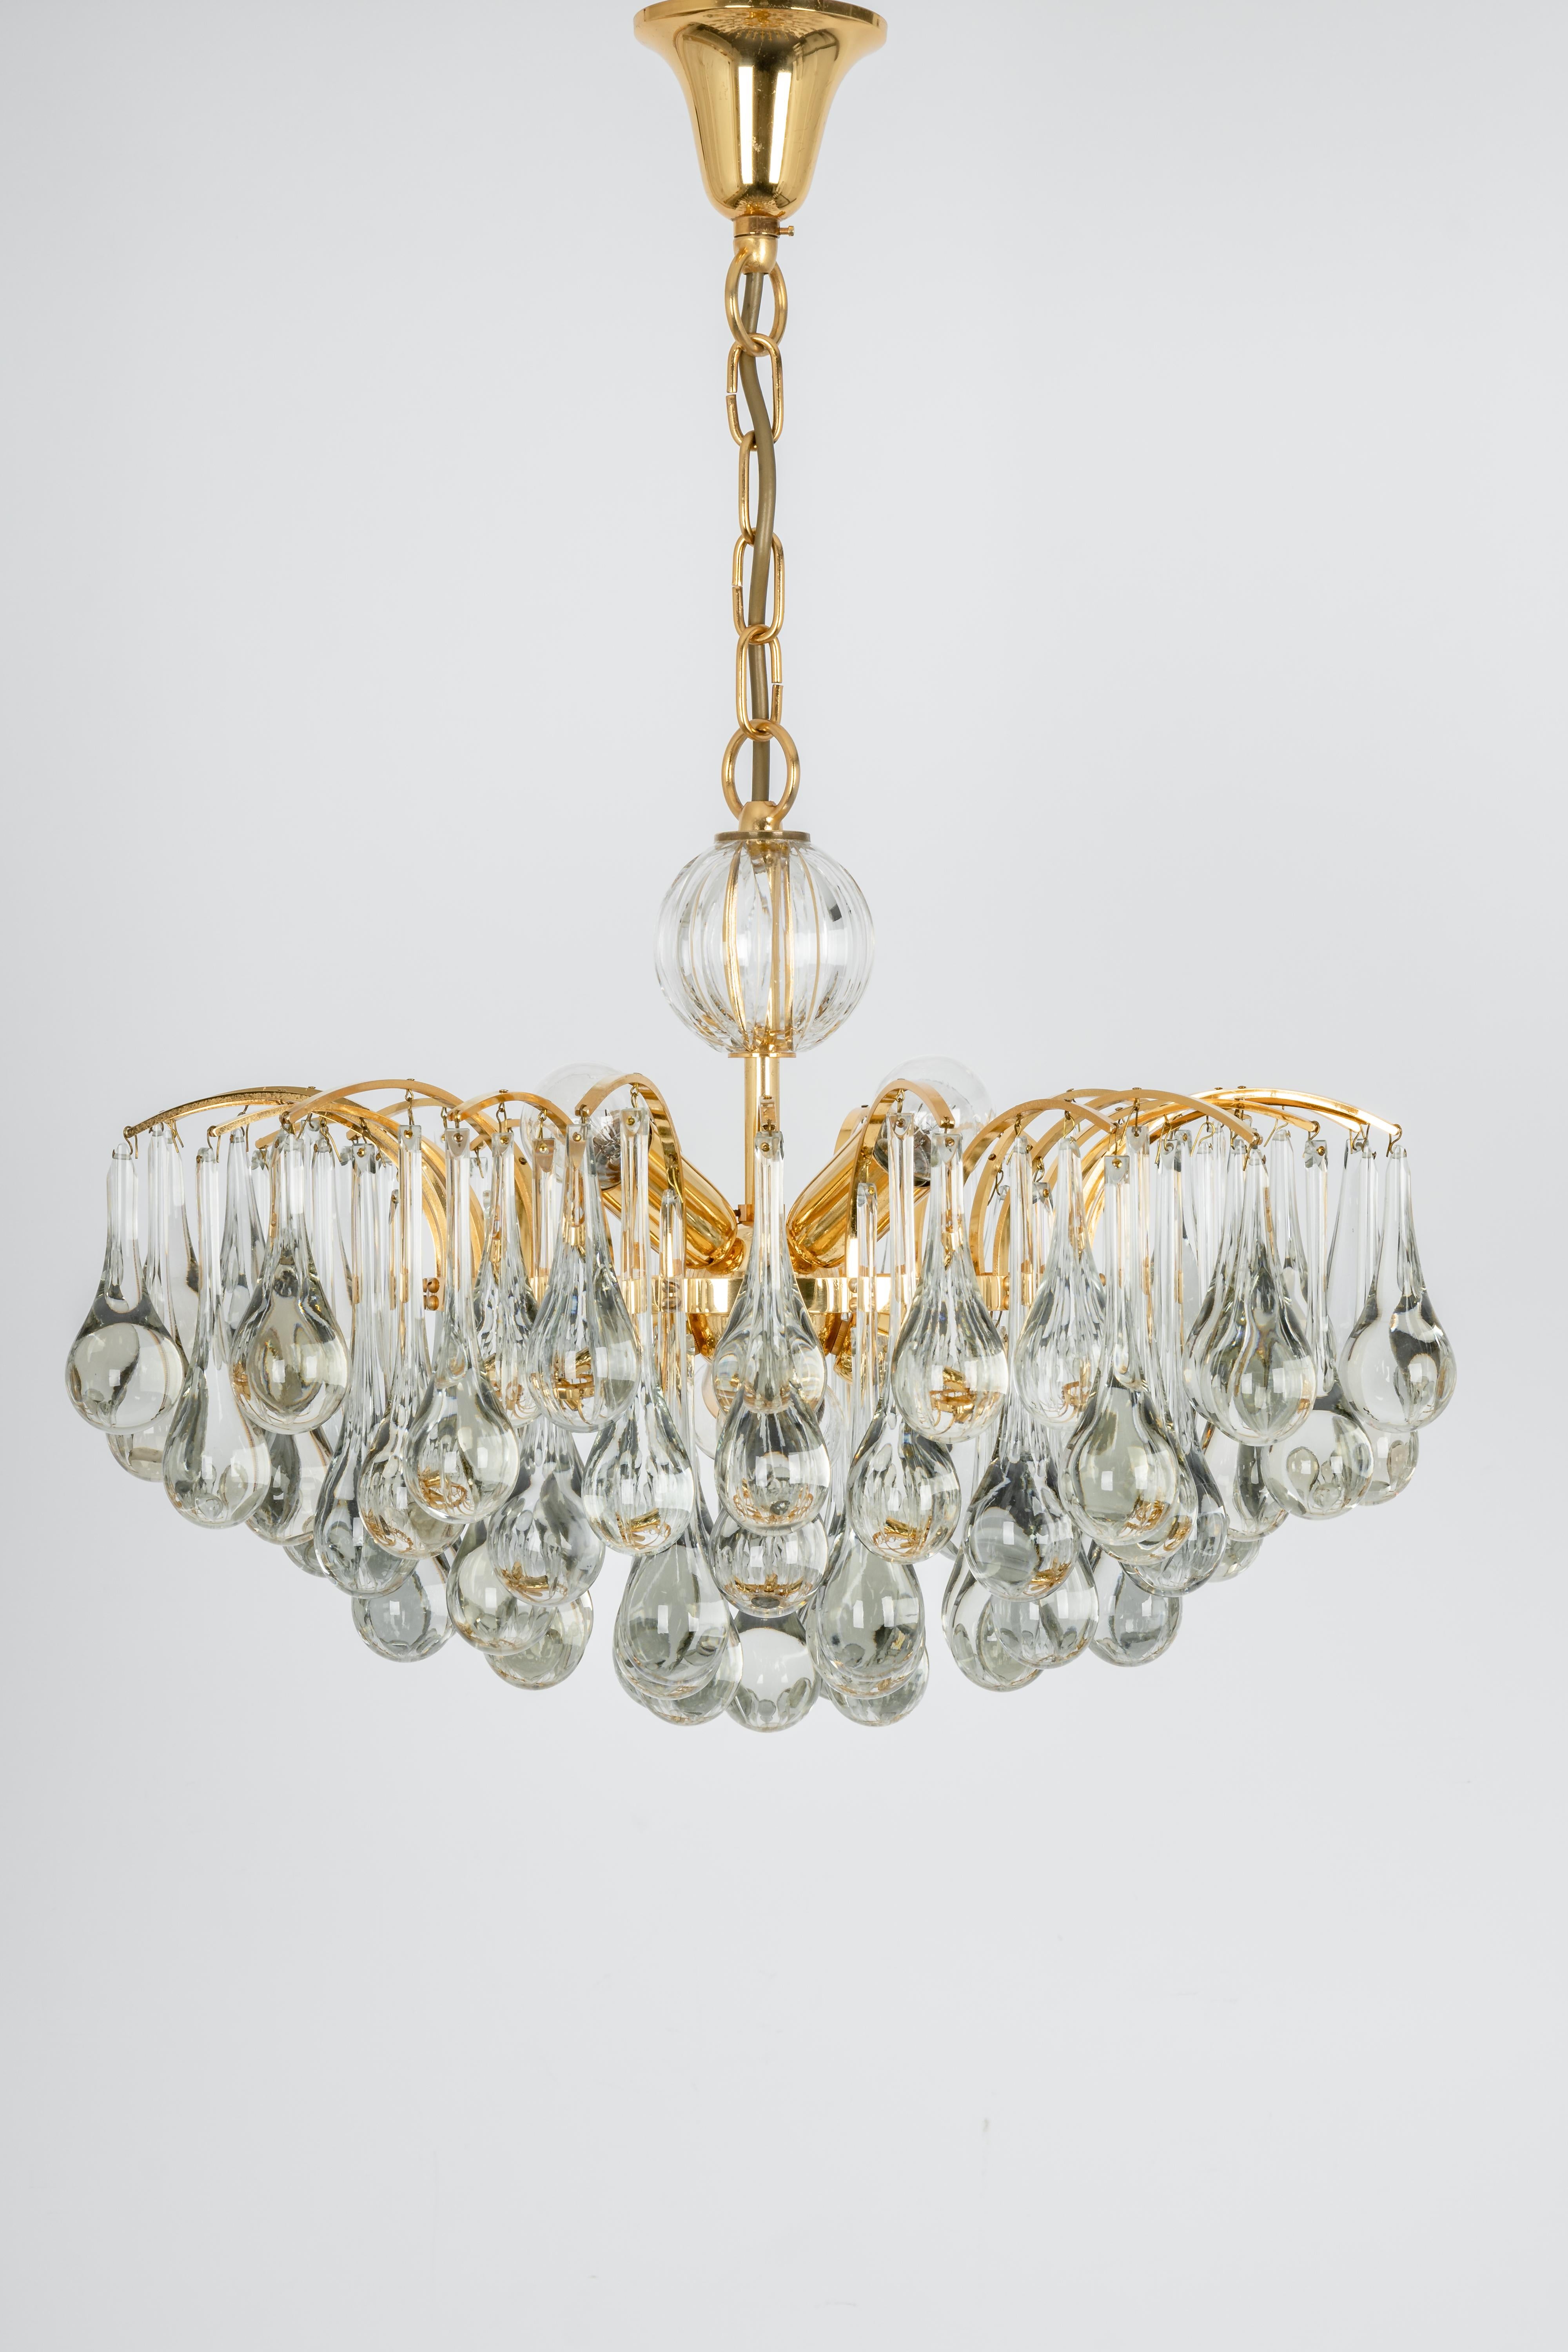 1 of 2 Large Murano Glass Tear Drop Chandelier, Christoph Palme, Germany, 1970s For Sale 2